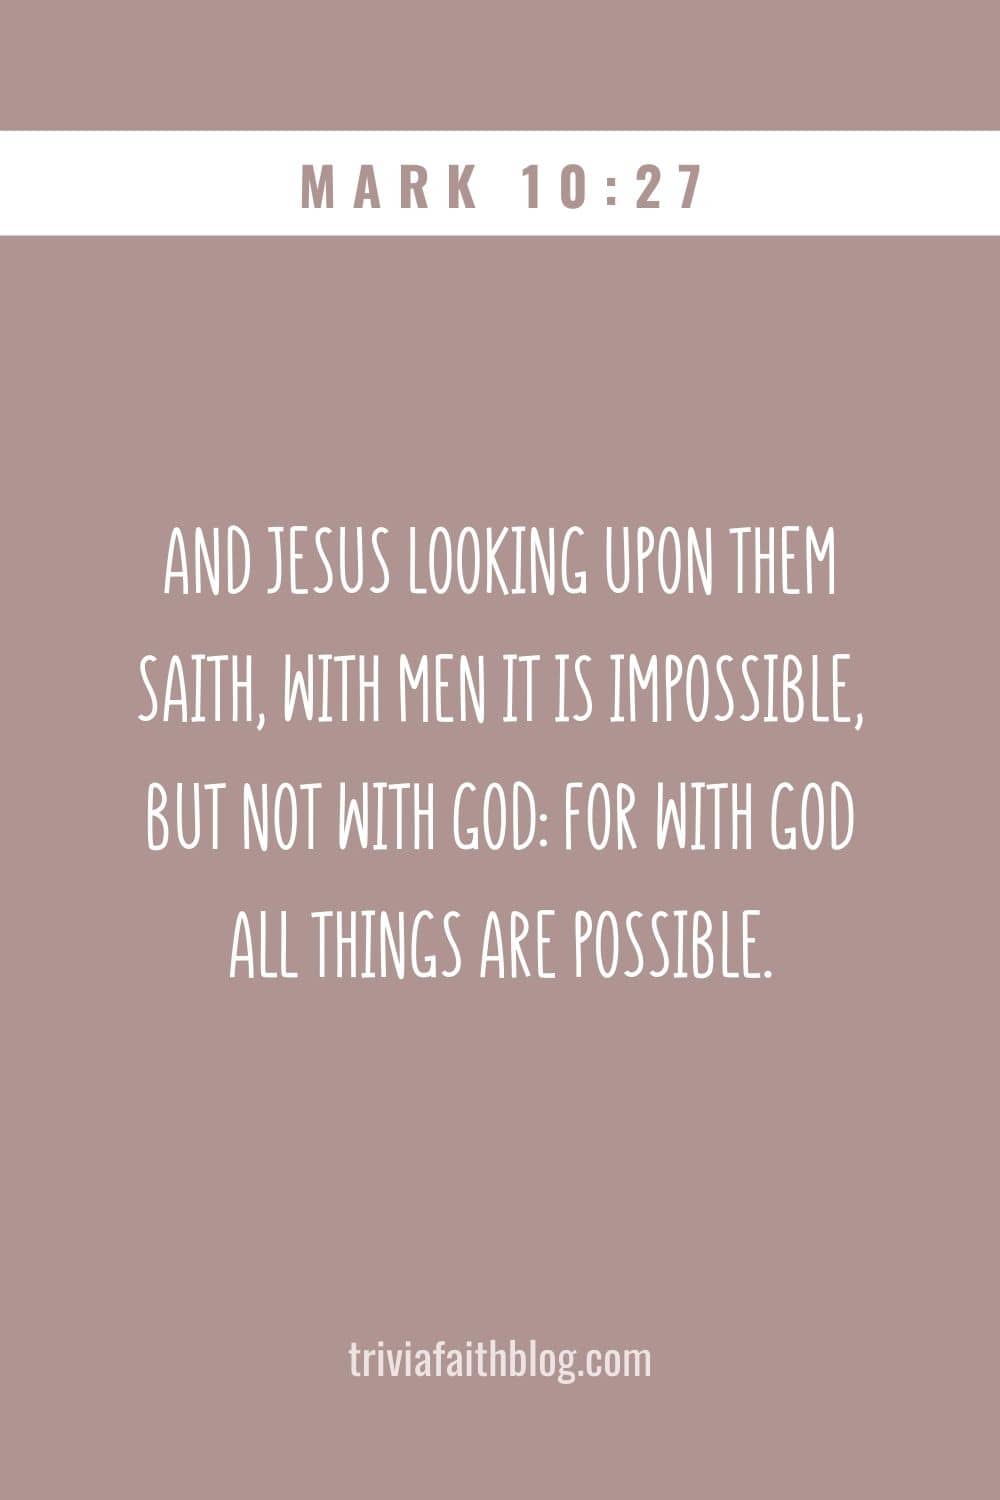 And Jesus looking upon them saith, With men it is impossible, but not with God for with God all things are possible.